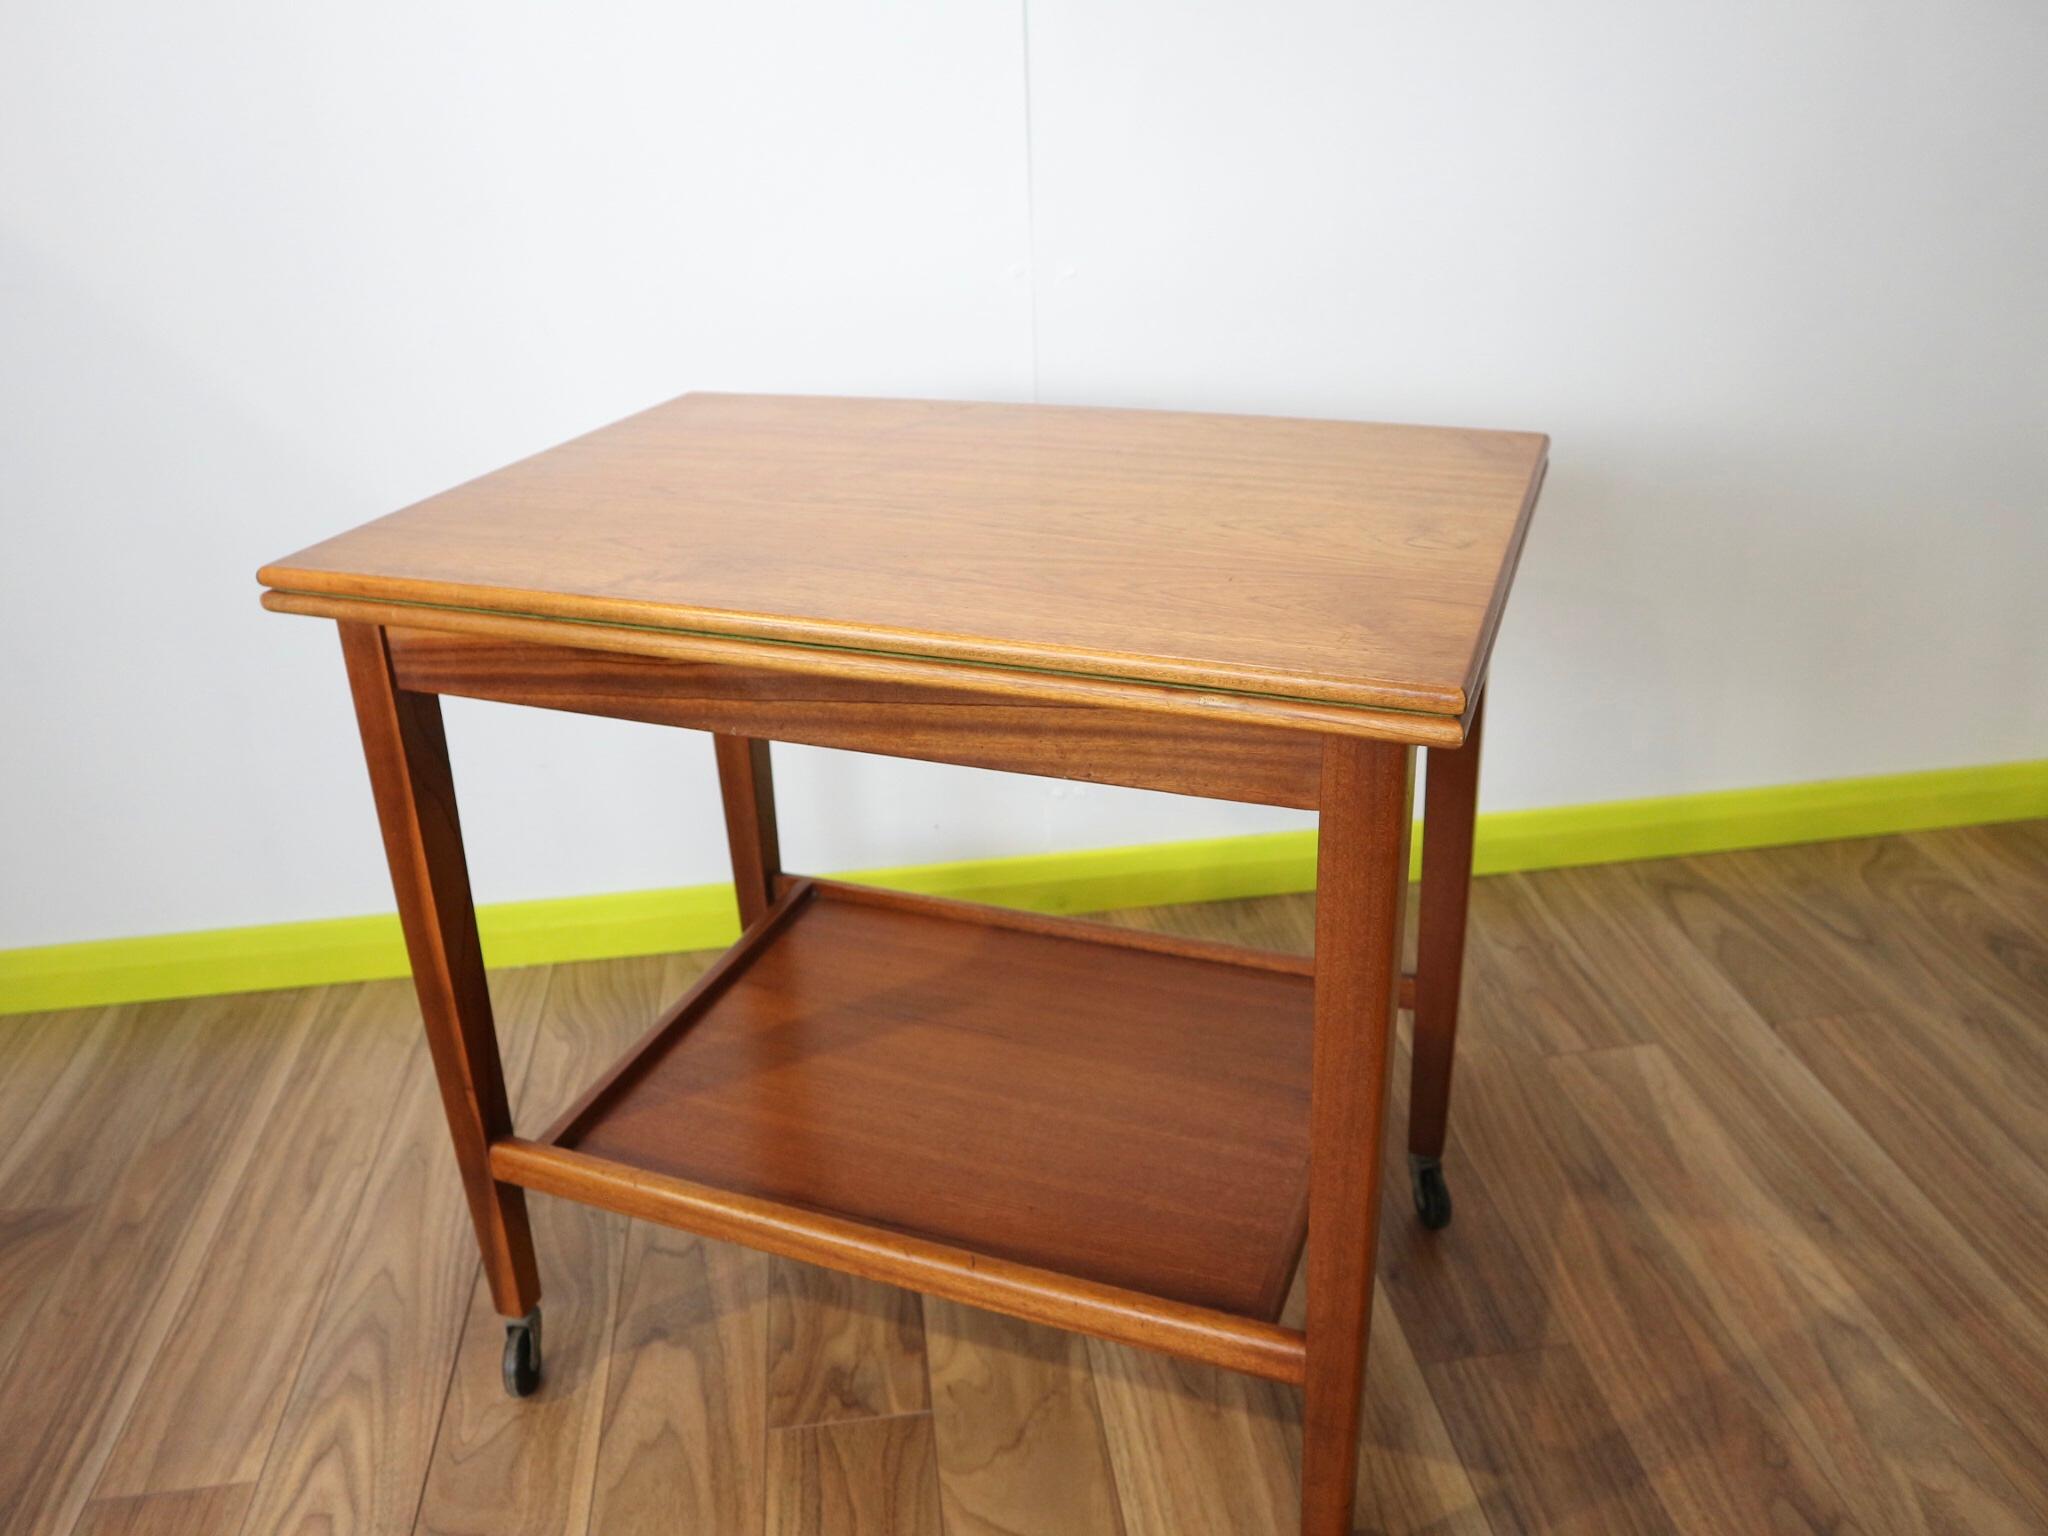 A delightful mid century teak card games table made by Eastcraft of Scotland. A clever fold out top table, fully felted in green, felt in good condition. The top opens and turns to reveal a drawer space for keeping cards, dice, domino's etc. The